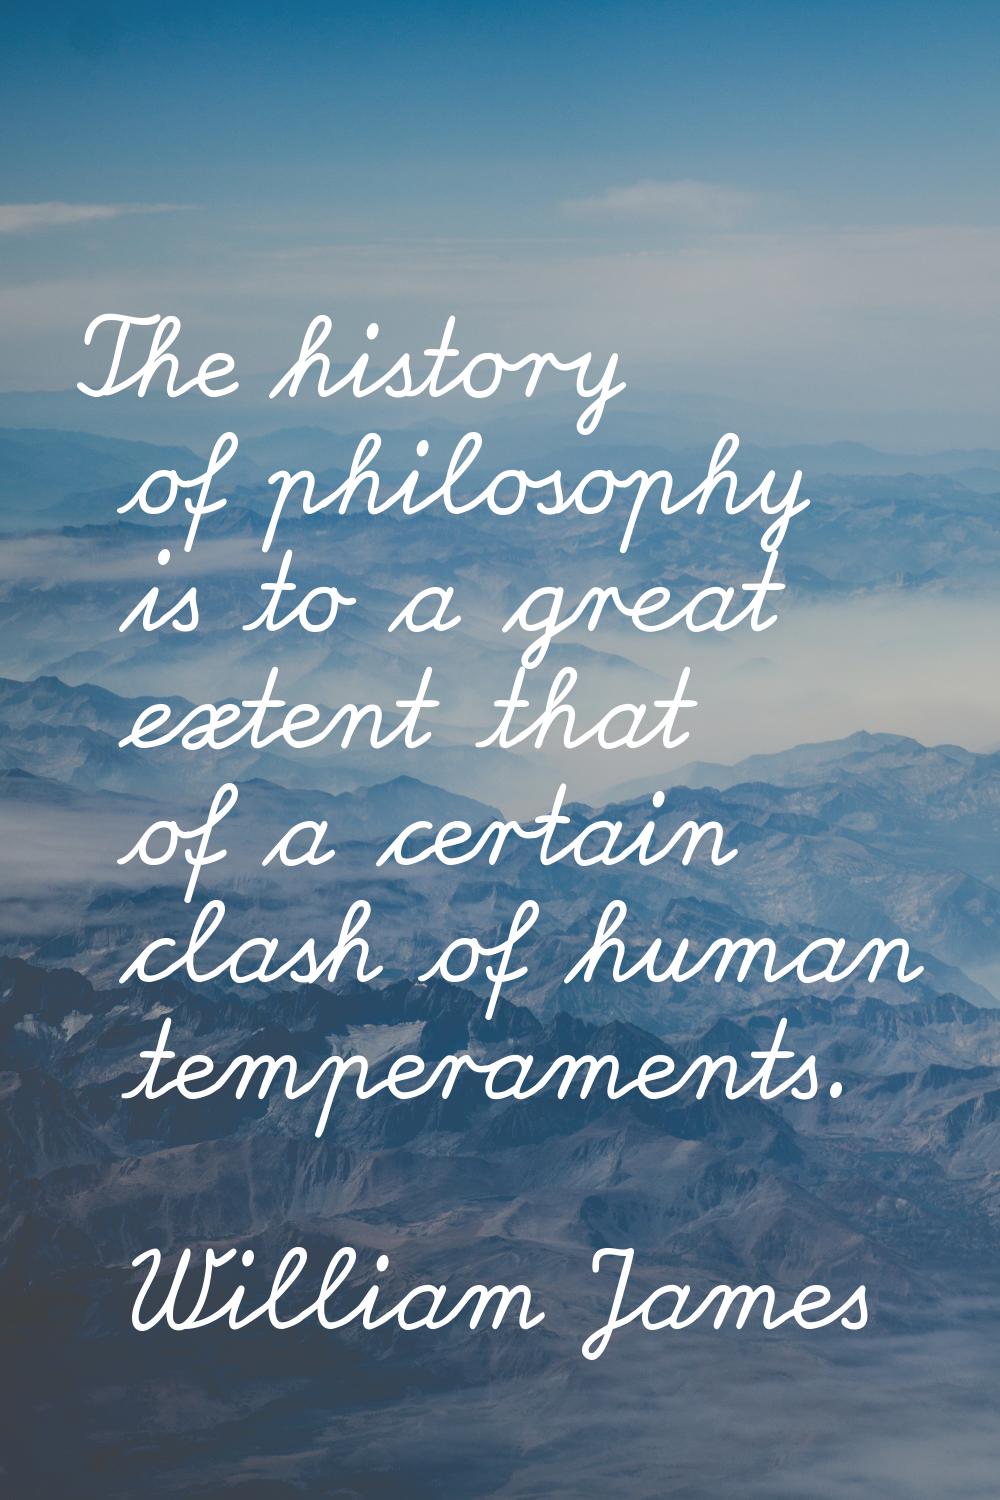 The history of philosophy is to a great extent that of a certain clash of human temperaments.